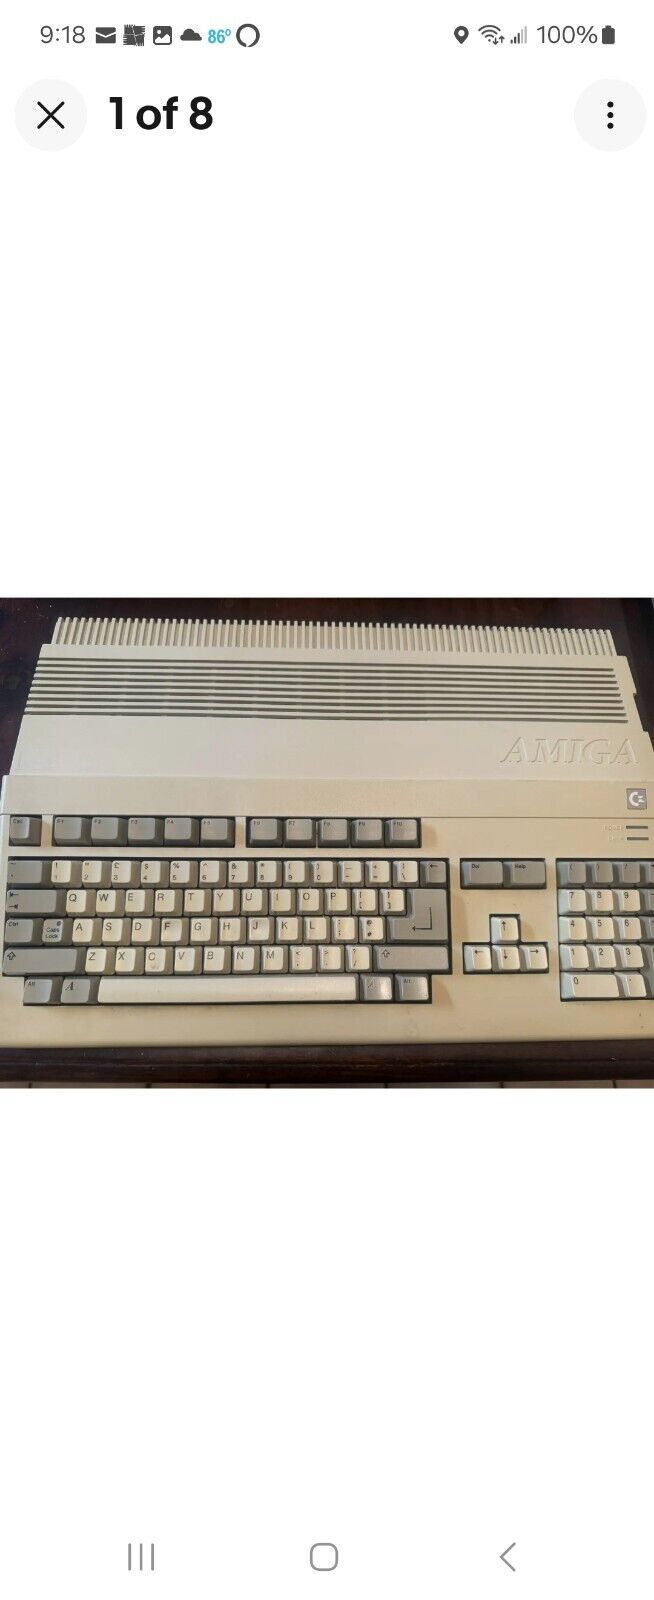   AMIGA 500  COMMODORE With Mod For Video 